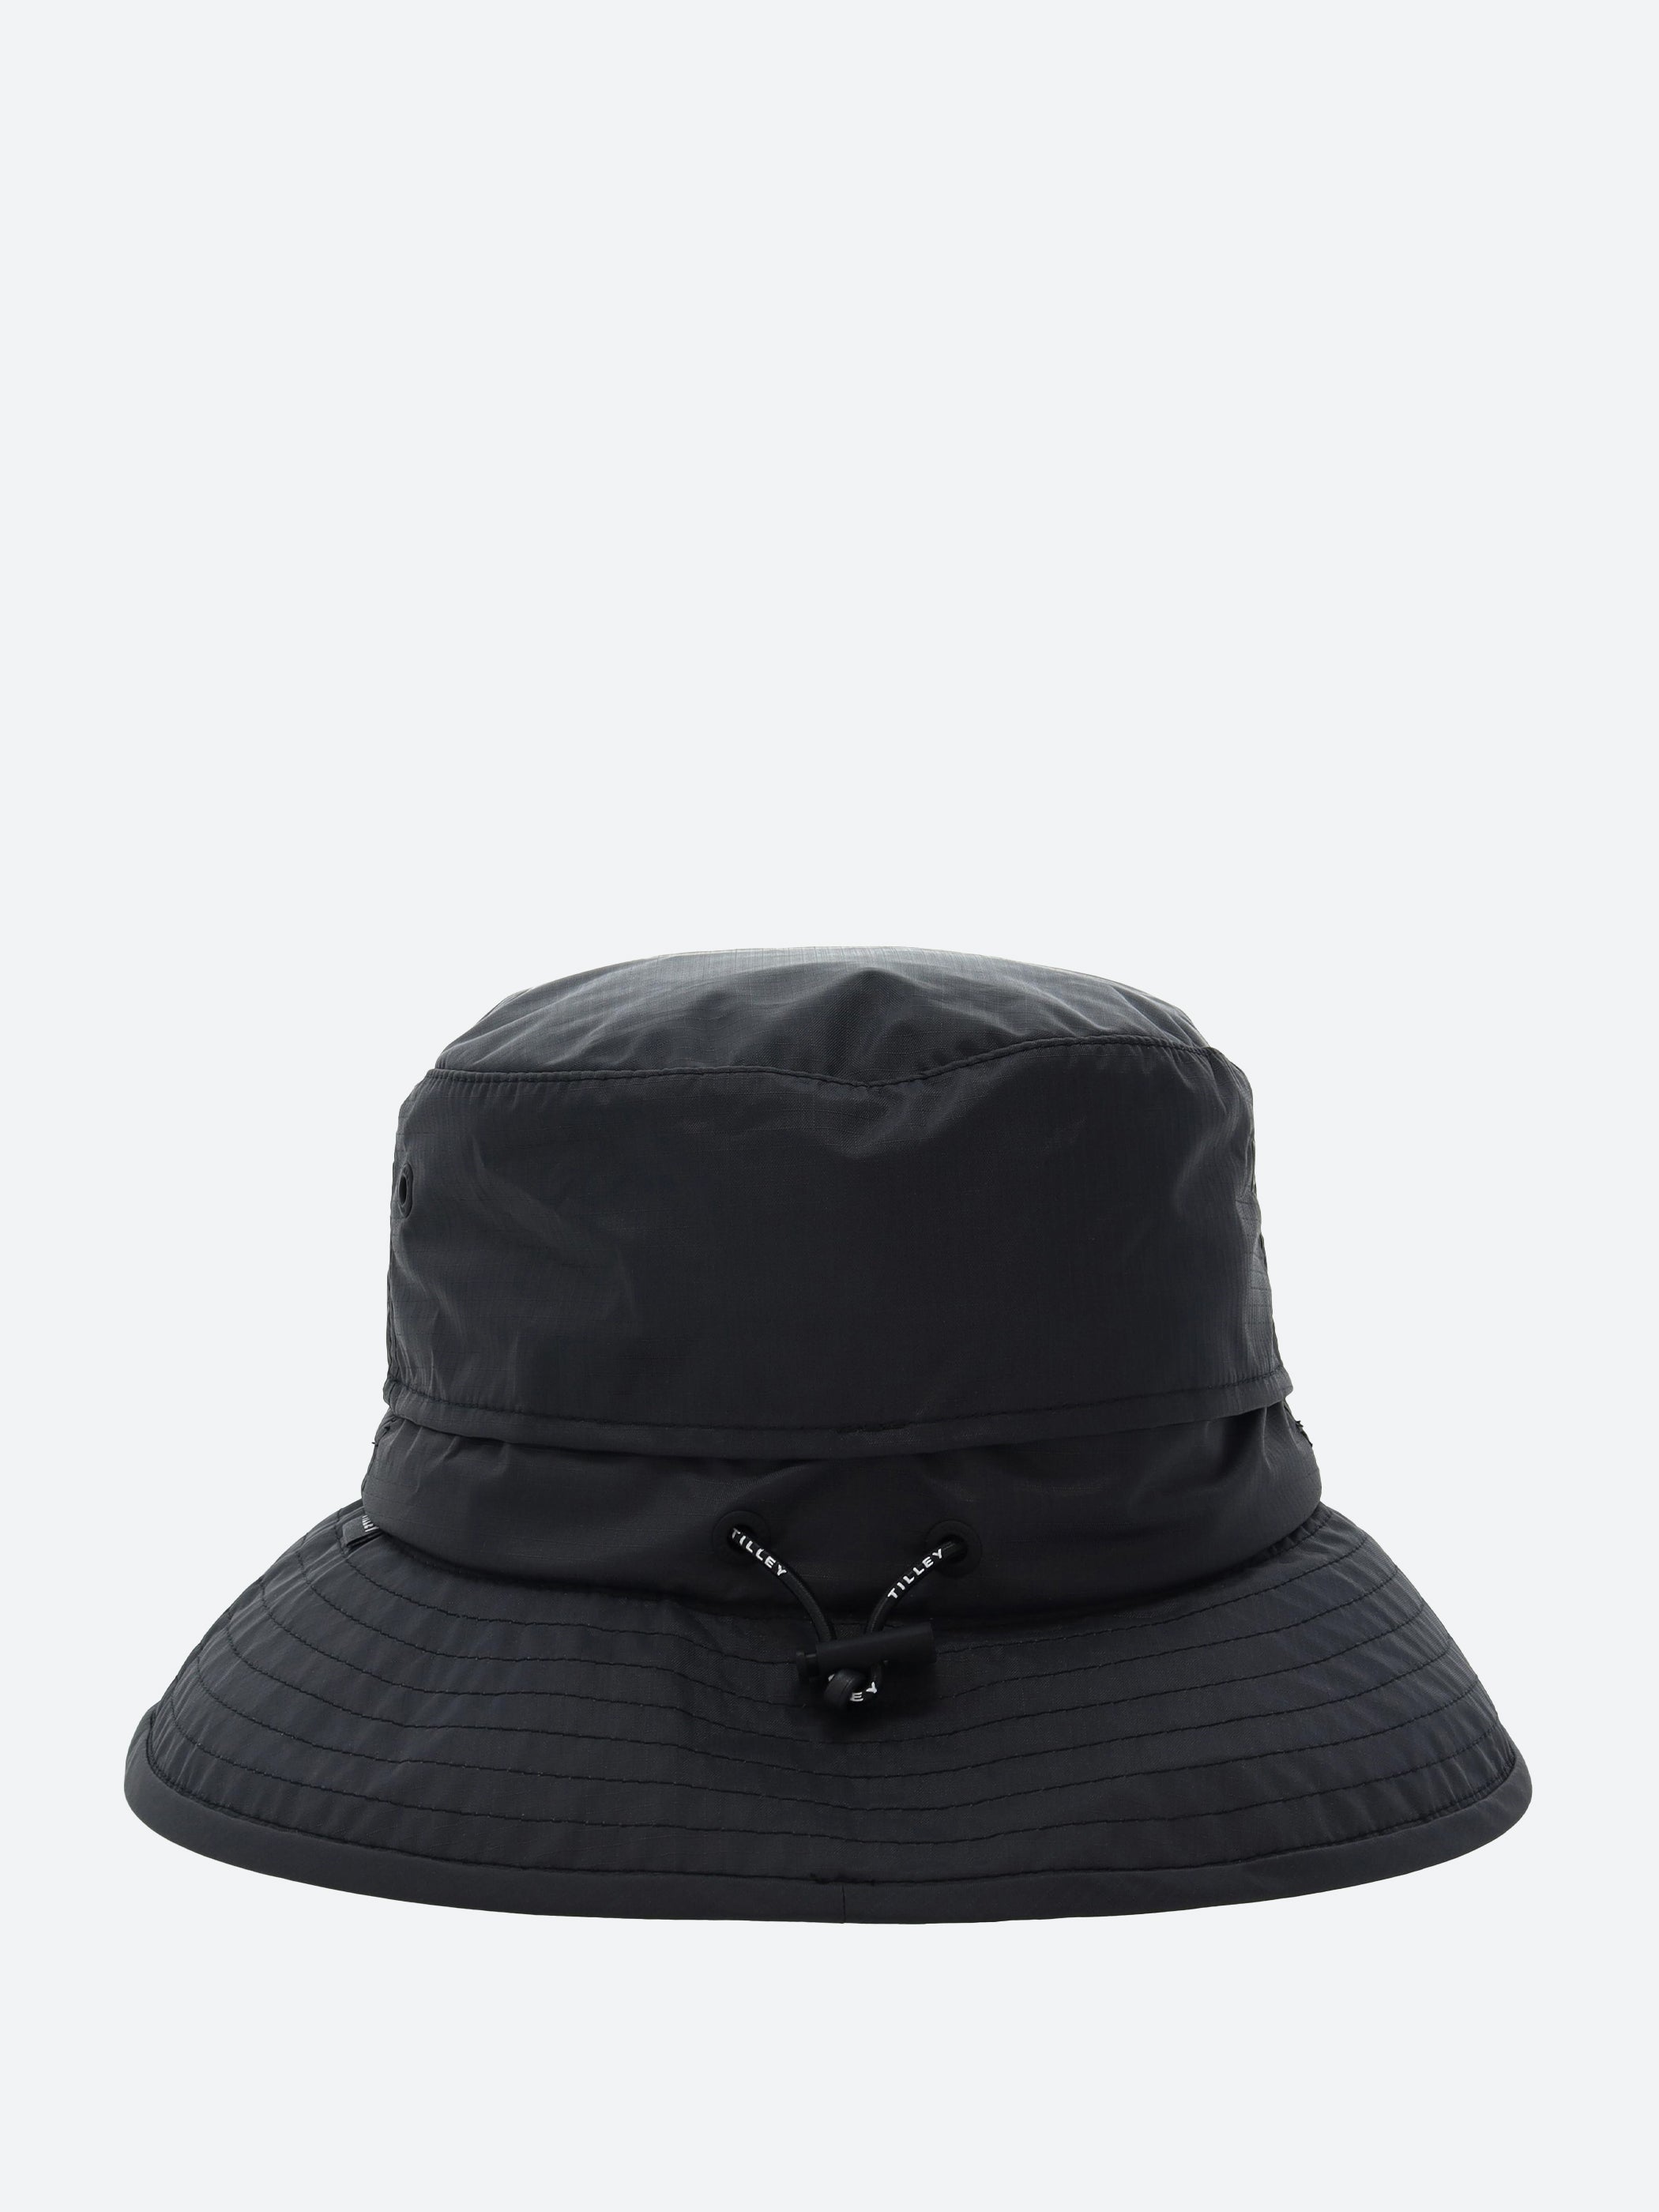 Tilley Traverse Bucket Hat, FREE SHIPPING in Canada